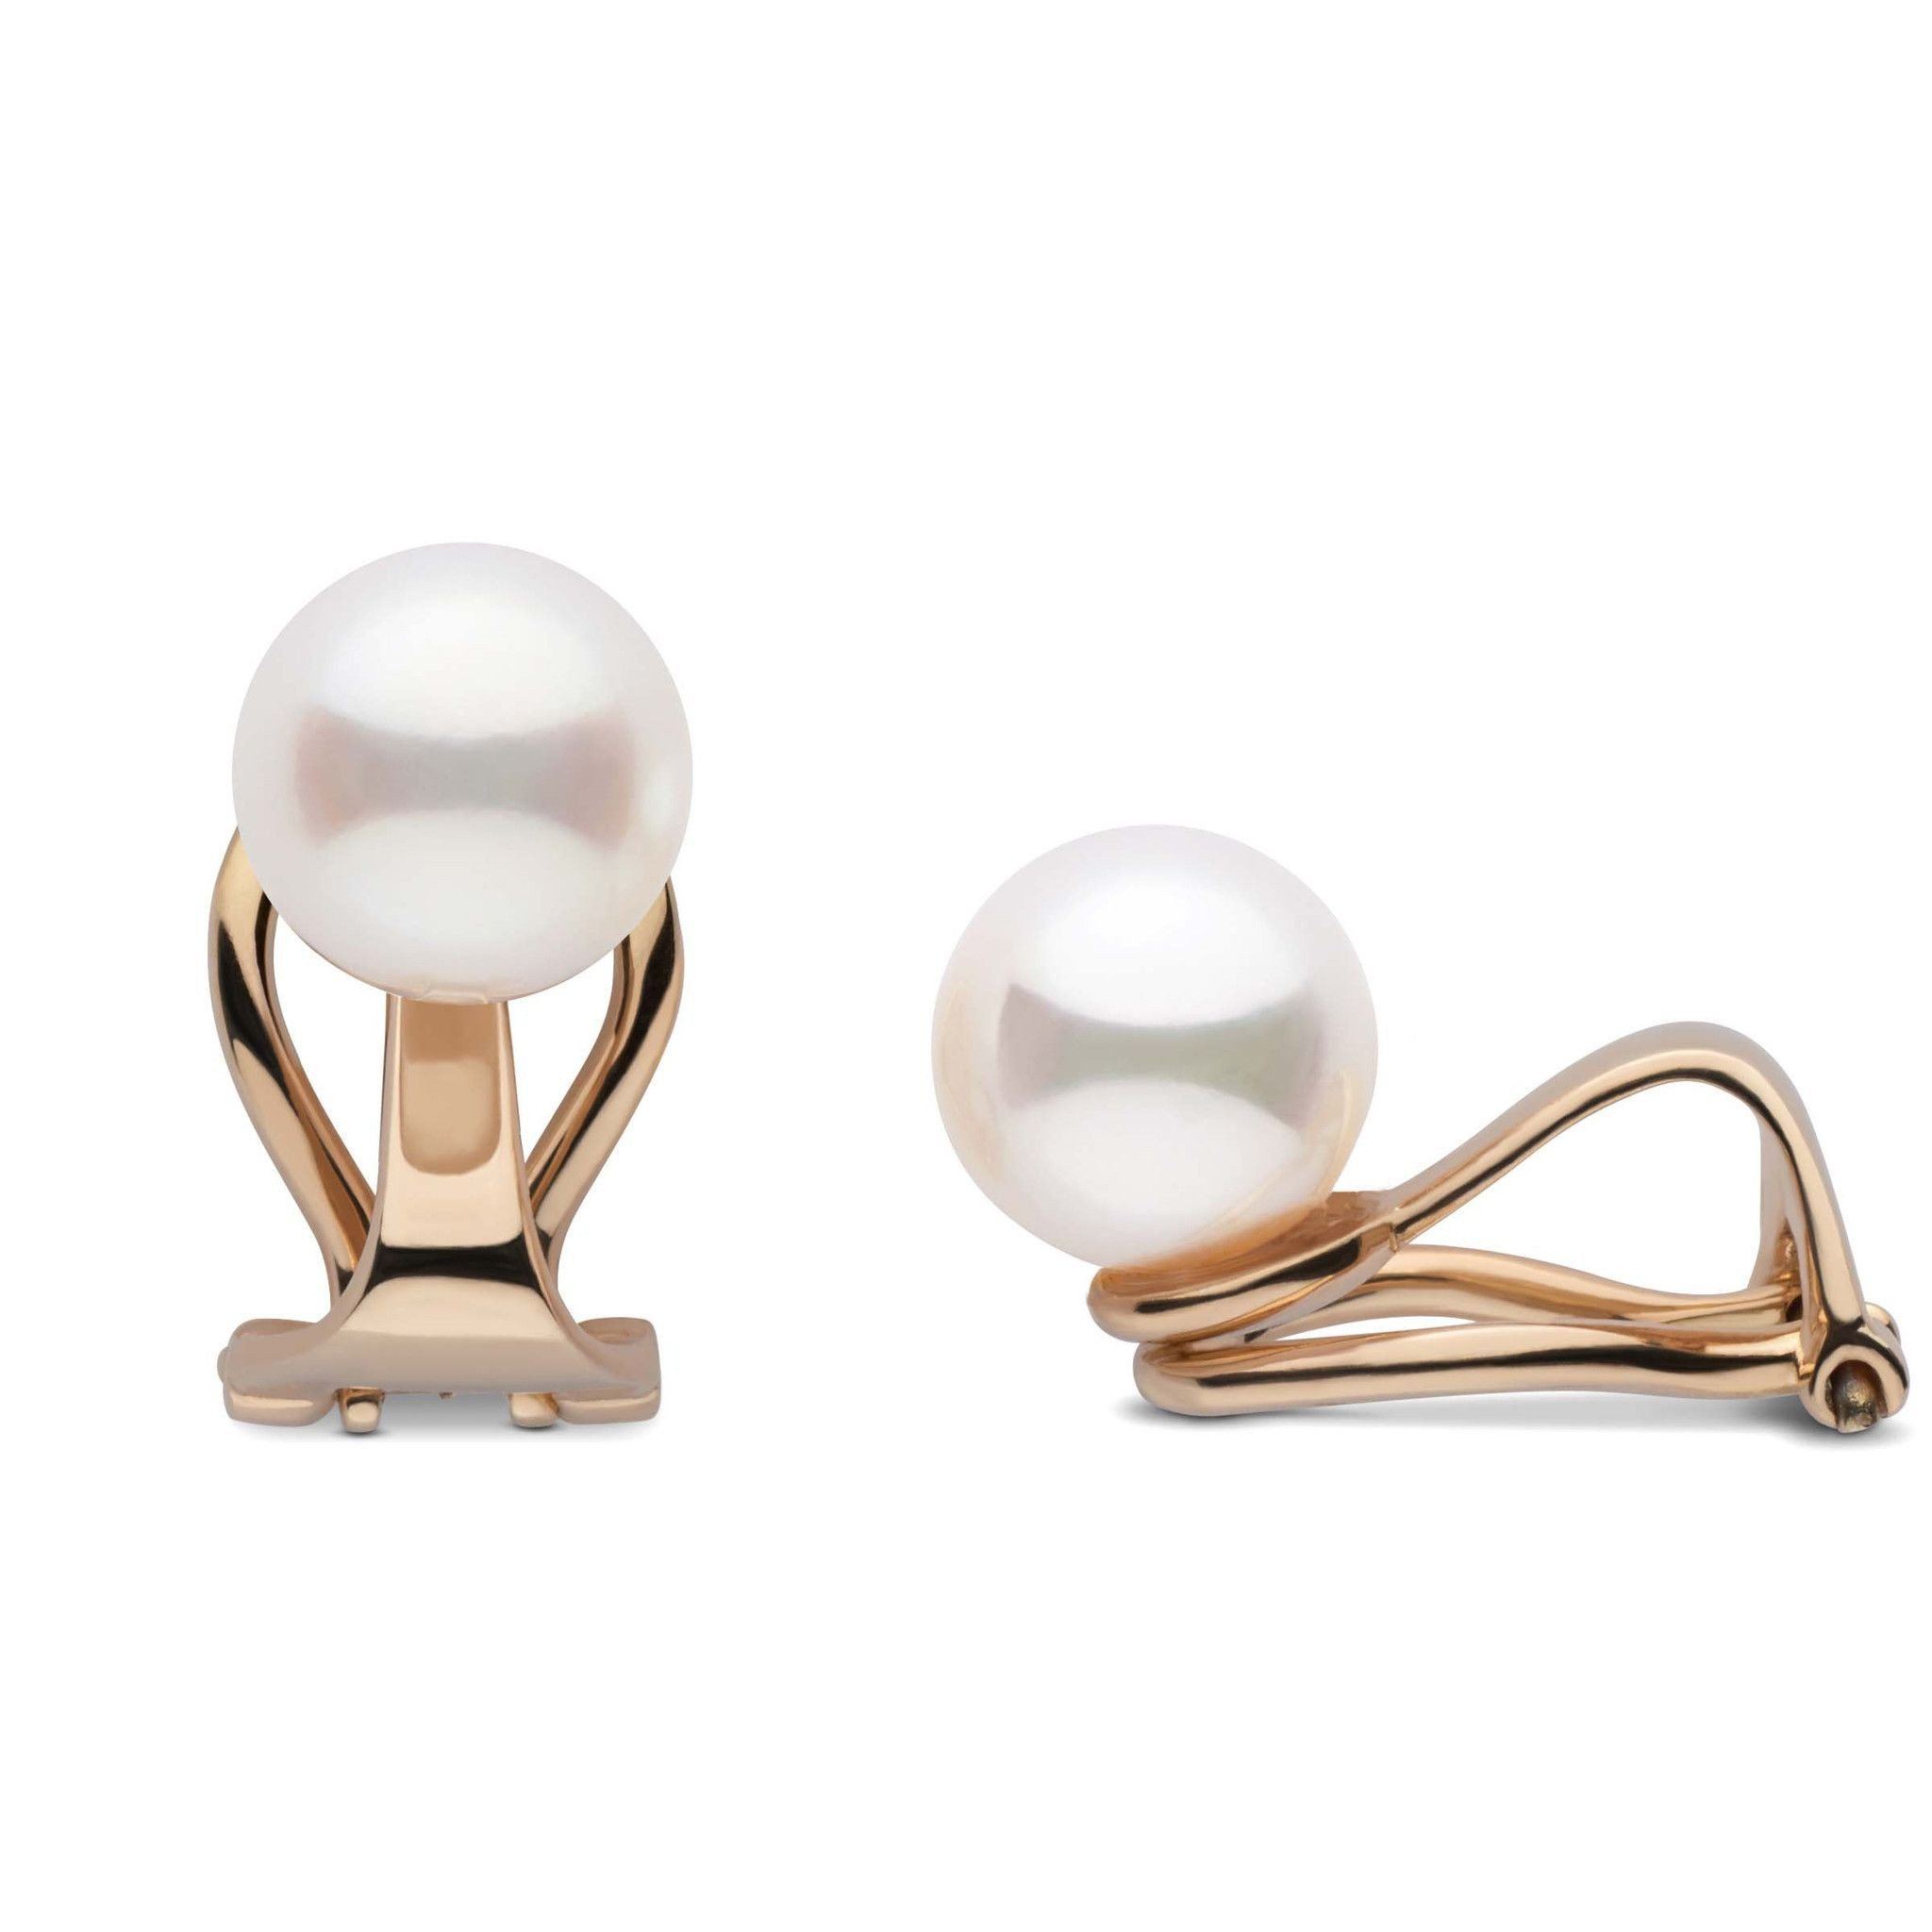 Freshadama freshwater 7.5-8.0 mm Clip-on Pearl Earrings for non-pierced ears in yellow gold